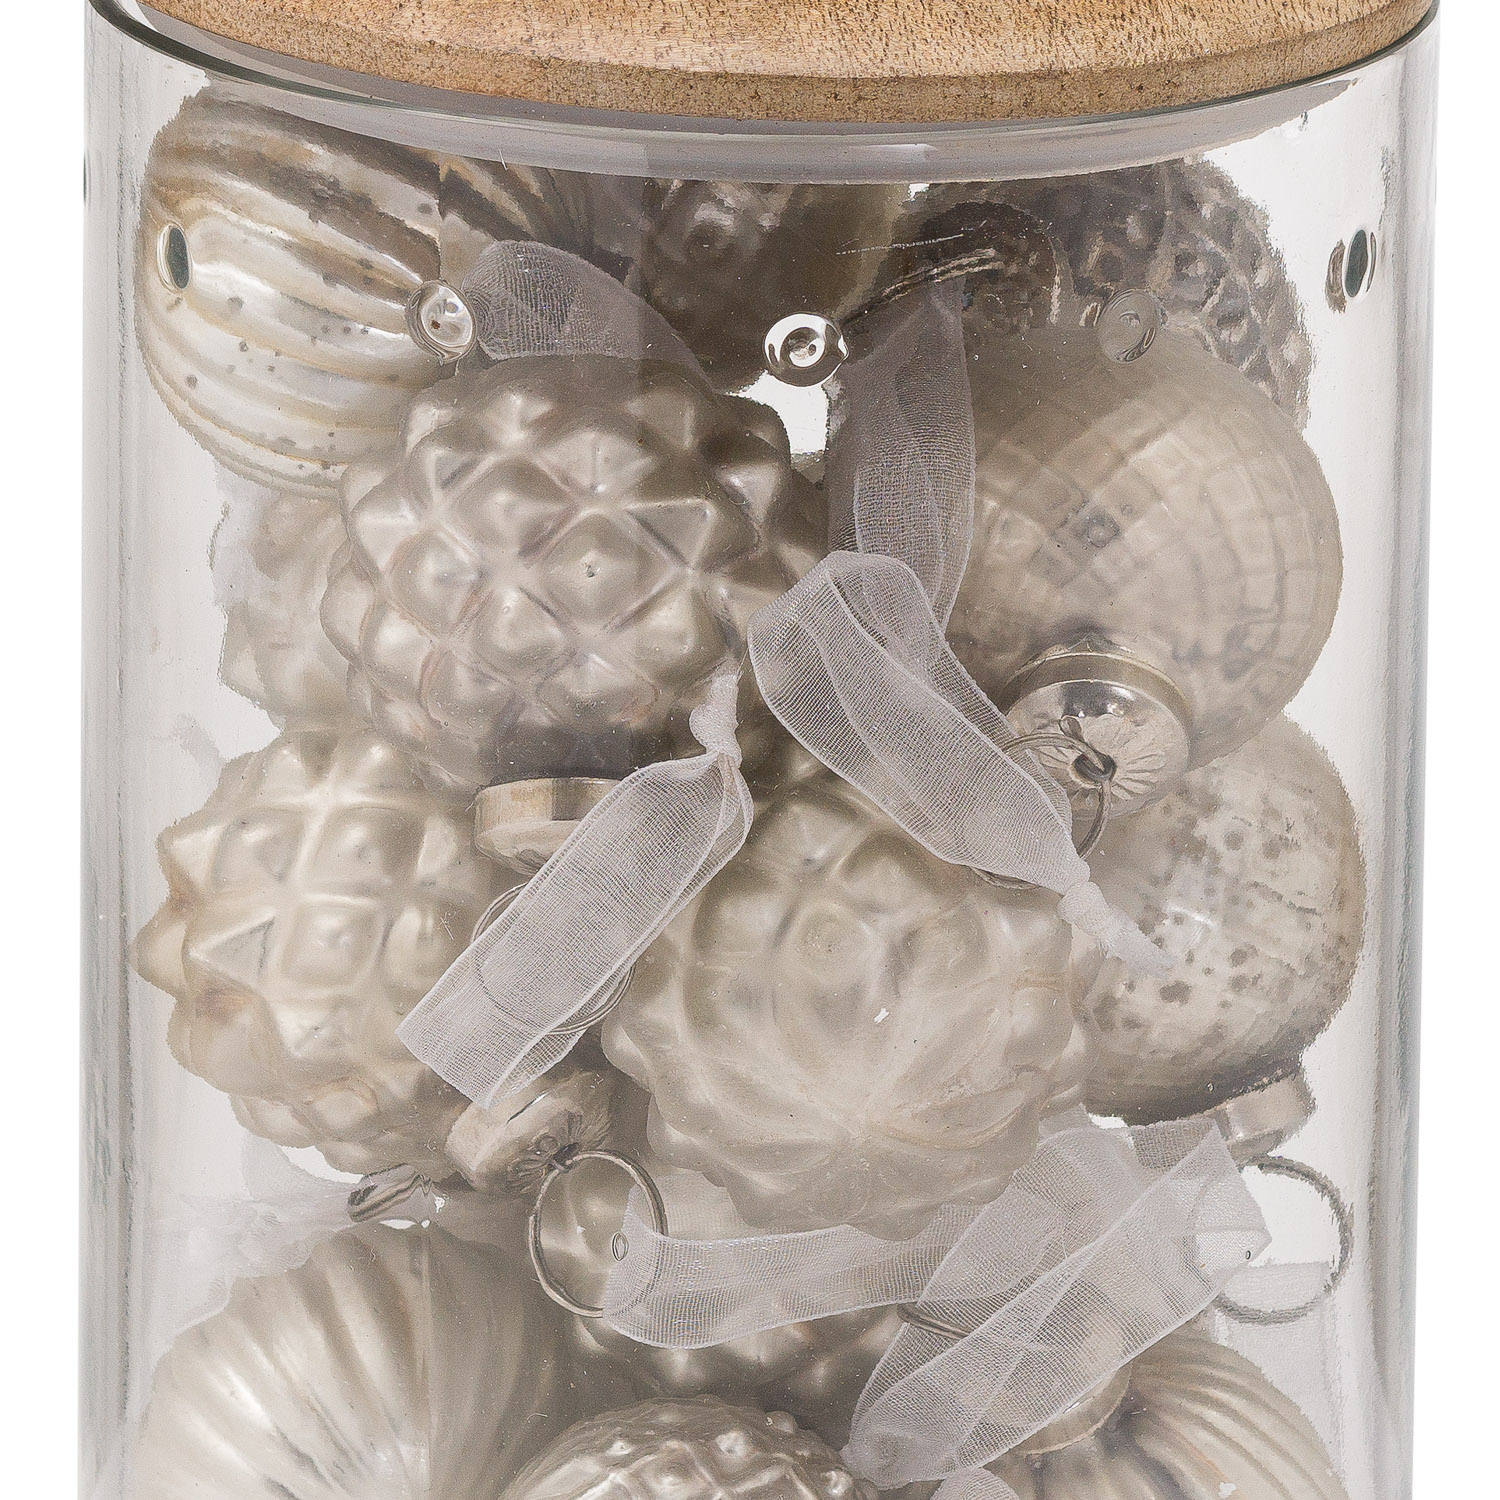 Set Of 12 Silver Hanging Decorations In Display Jar - Image 2